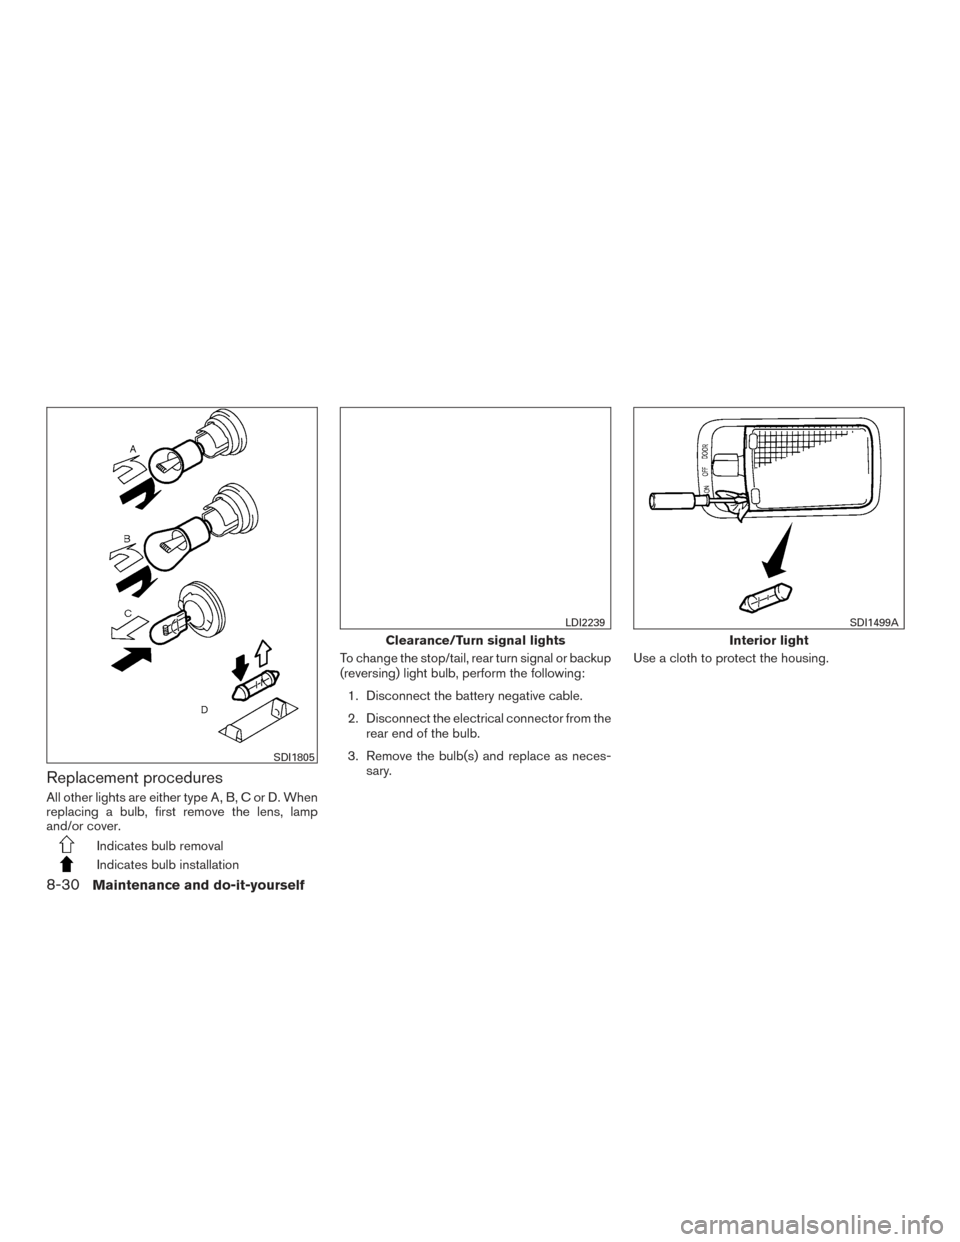 NISSAN VERSA NOTE 2015 2.G Owners Manual Replacement procedures
All other lights are either type A, B, C or D. When
replacing a bulb, first remove the lens, lamp
and/or cover.
Indicates bulb removal
Indicates bulb installationTo change the s